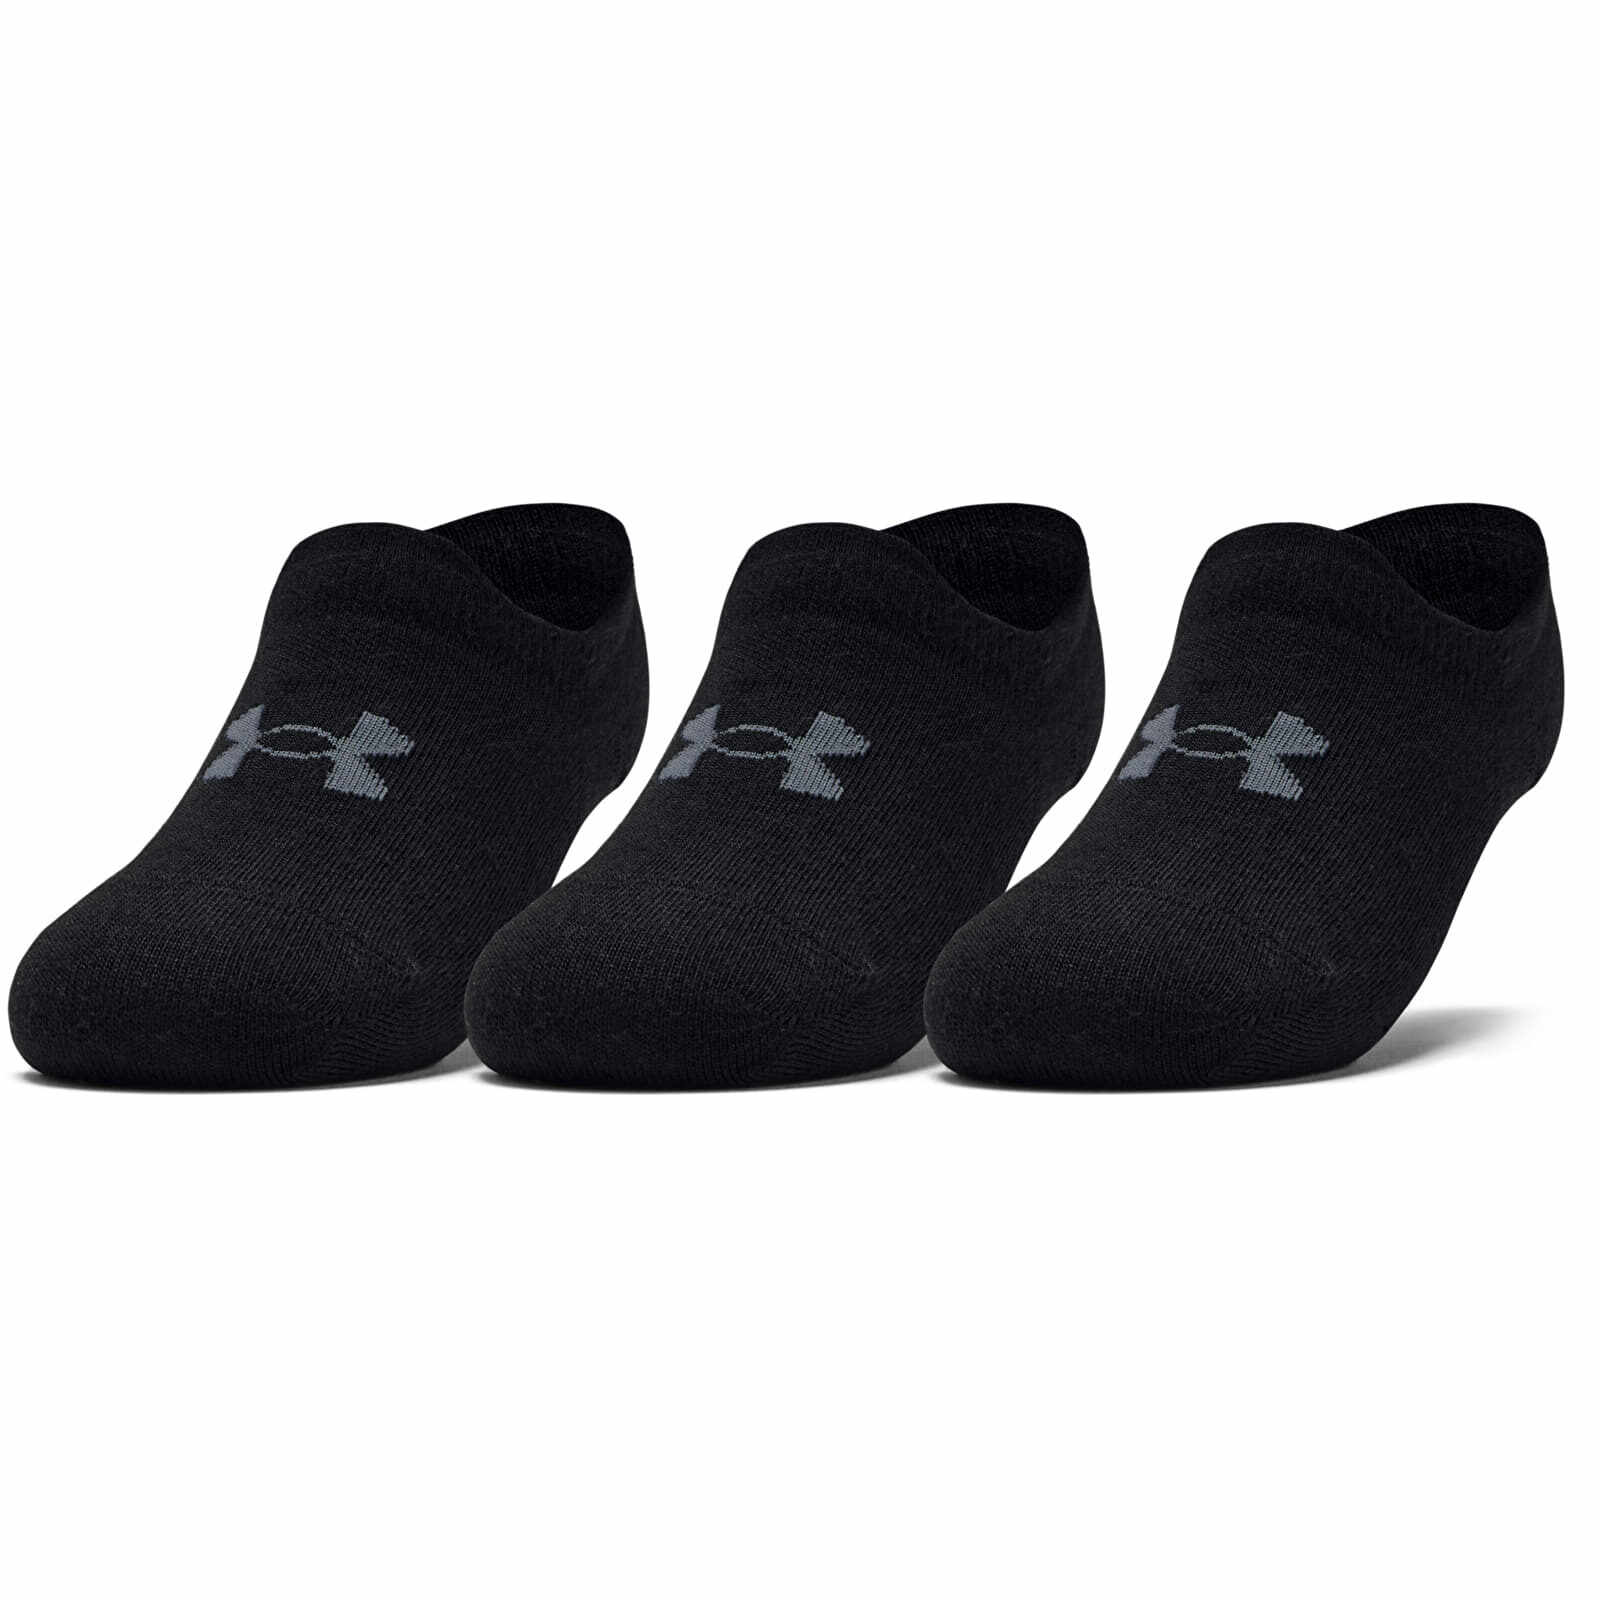 Under Armour Ultra Low 3-Pack Socks Black